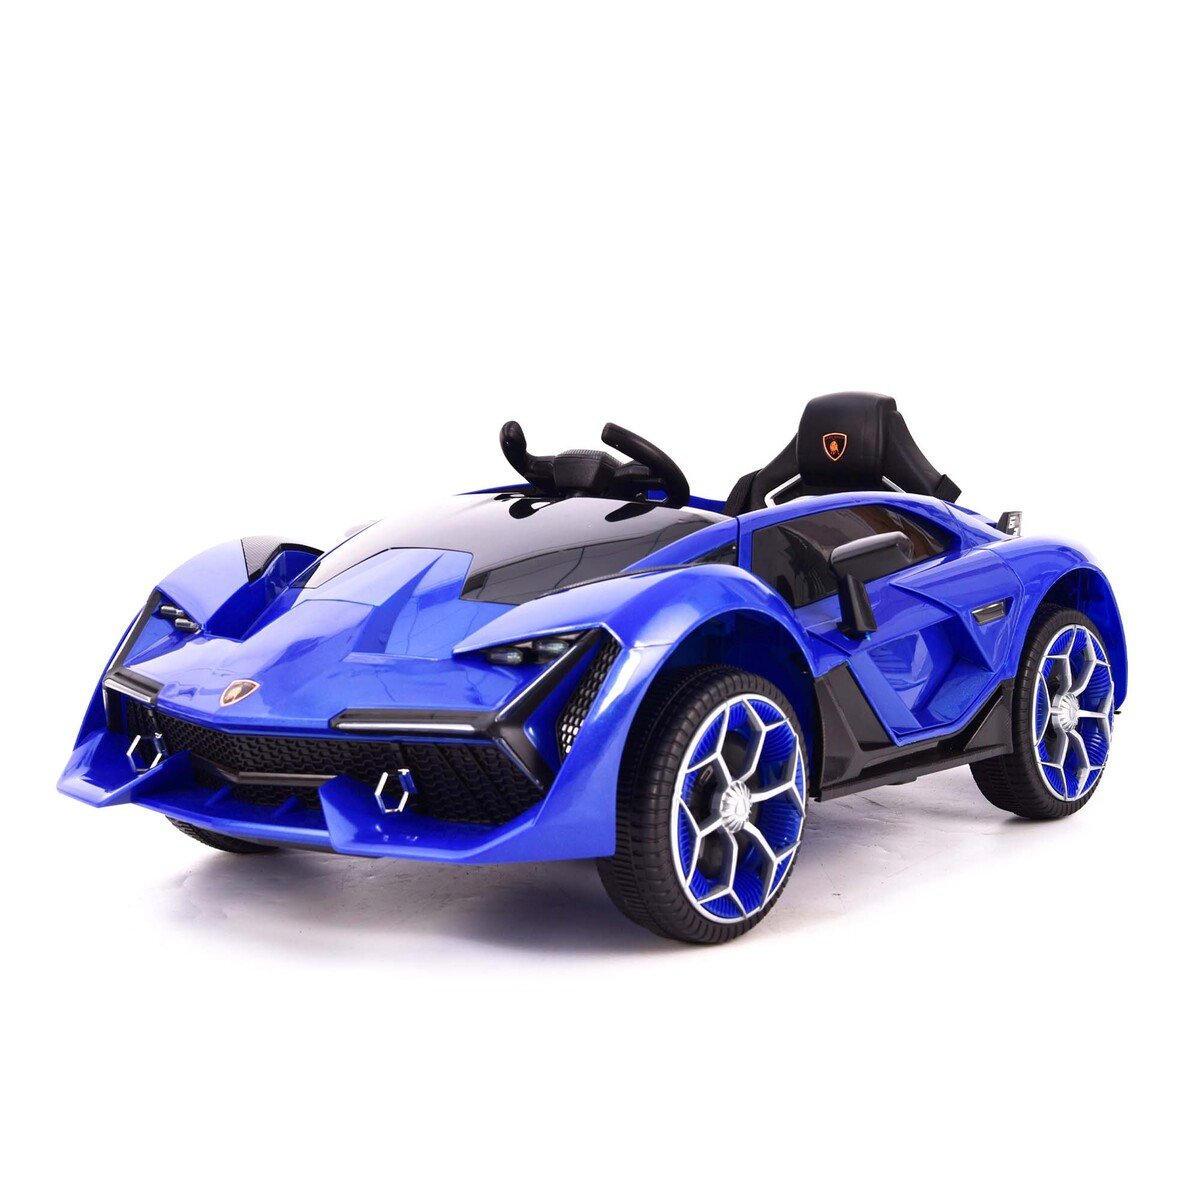 Skid Fusion Kids Battery Operated Motor Opendoor Car NEL603 Blue